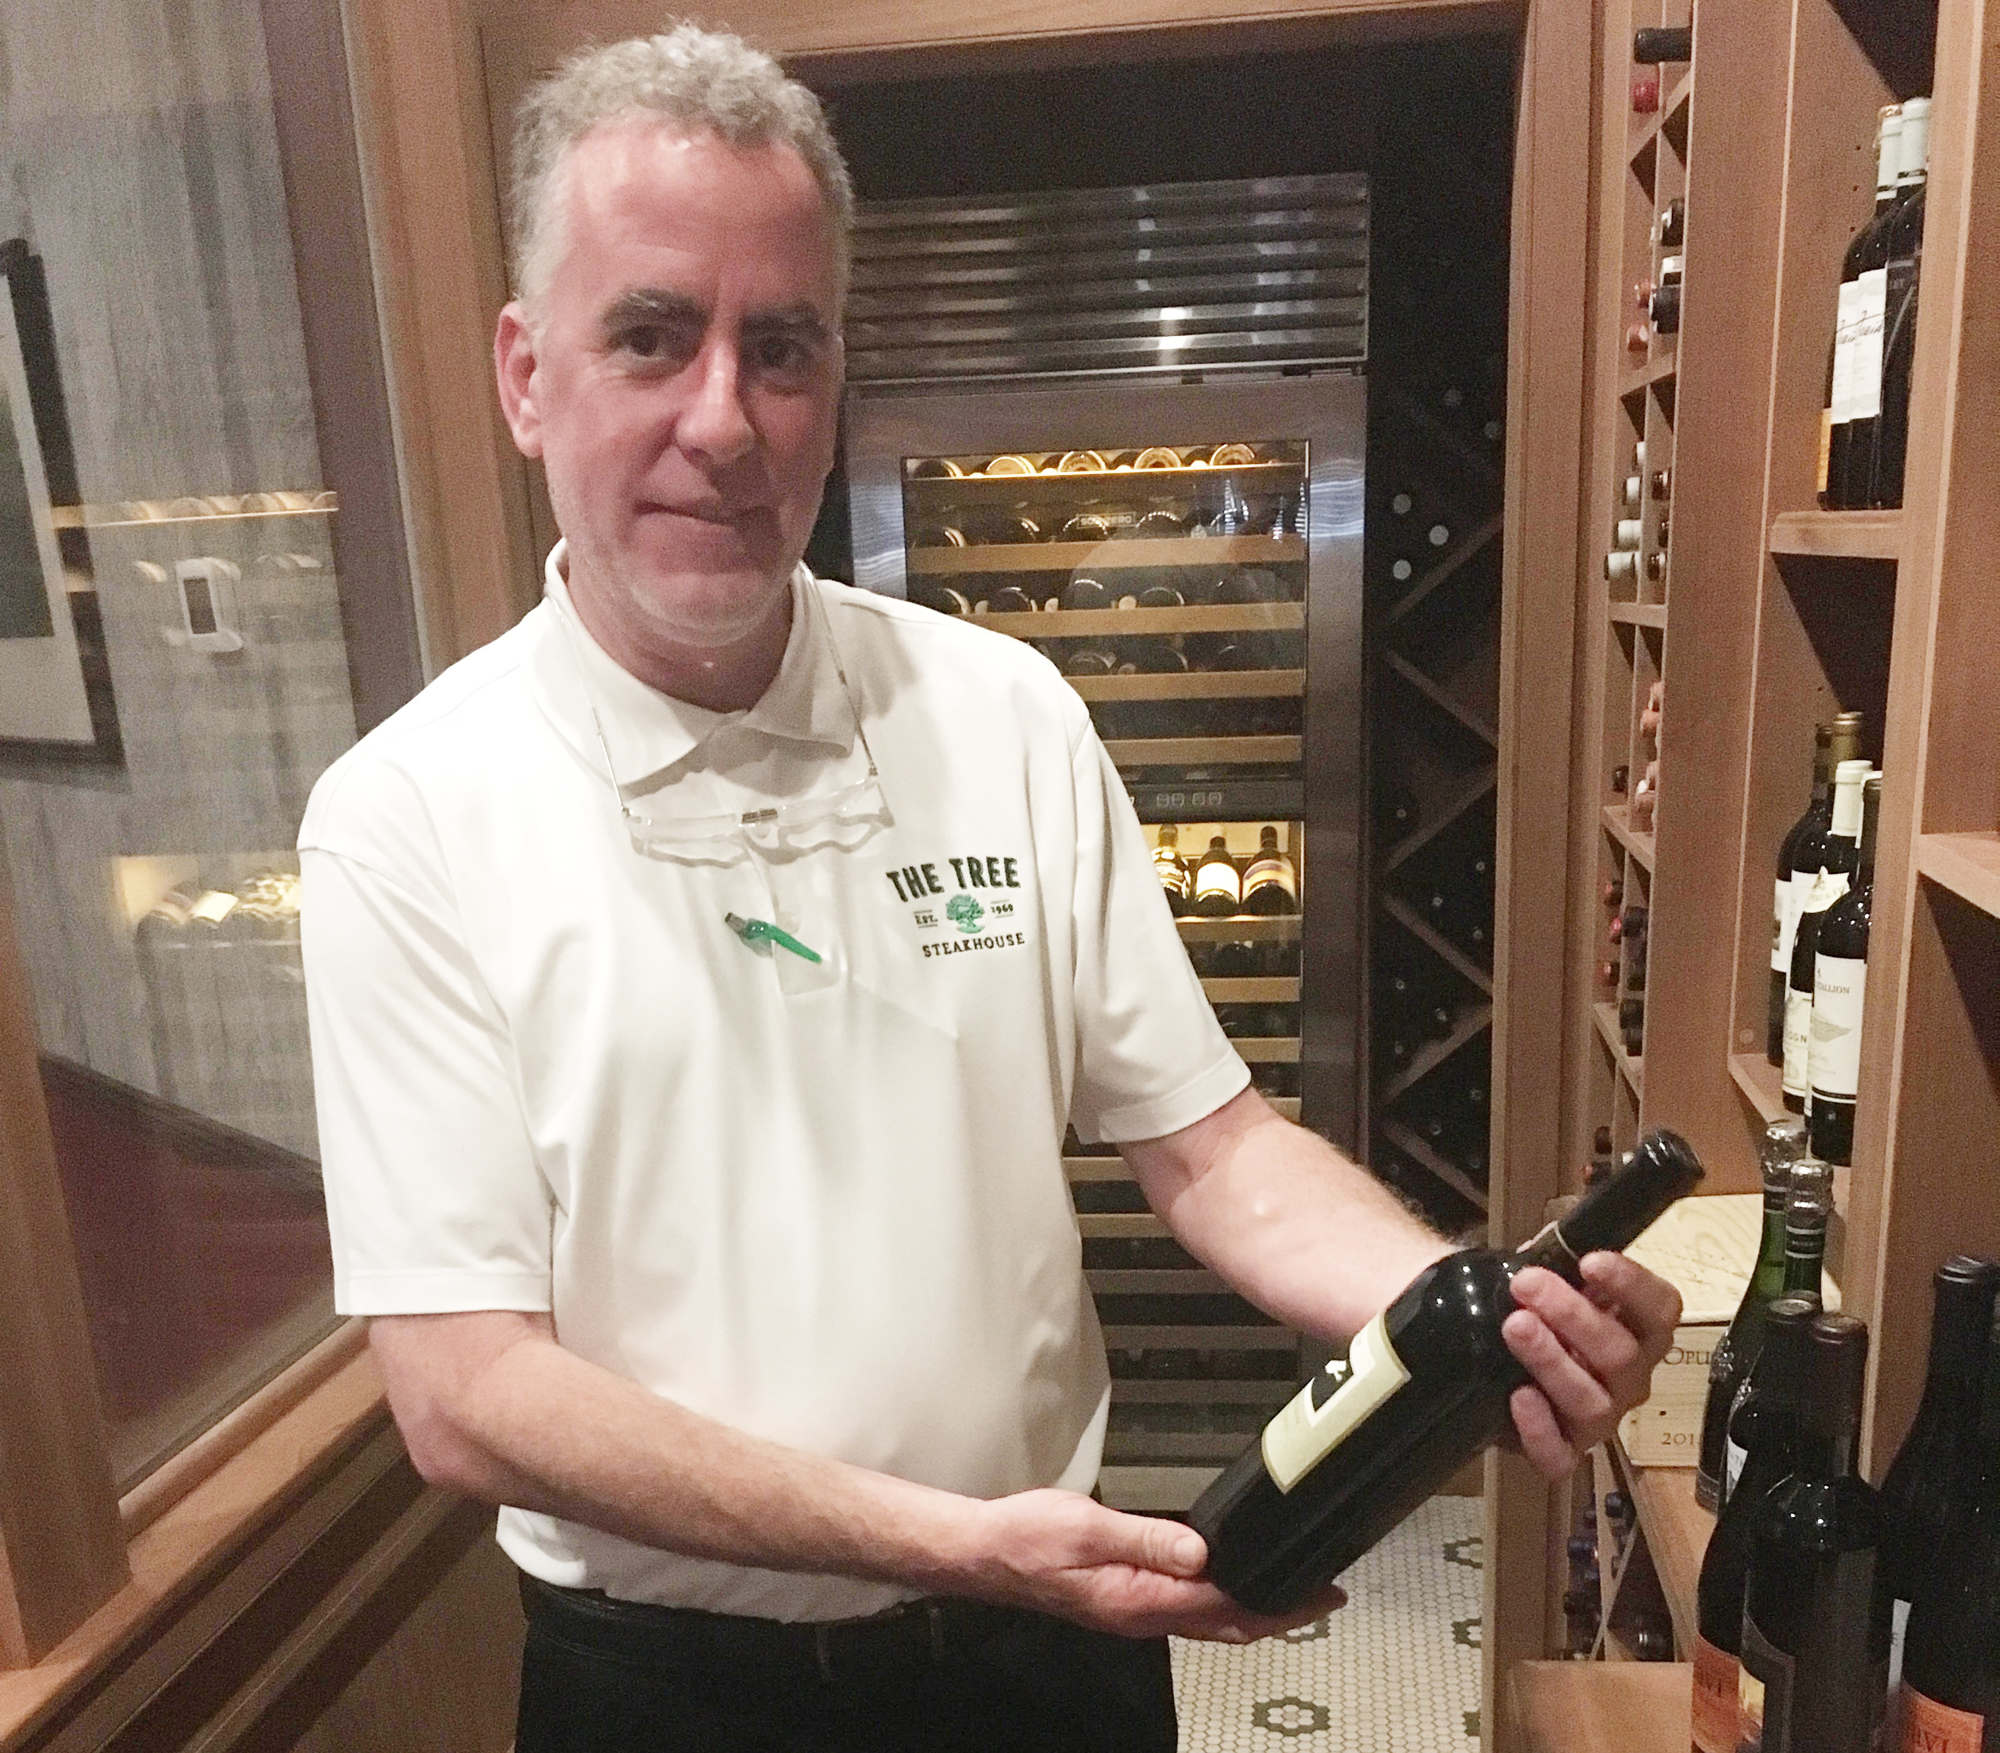 Joe Foster, The Tree Steakhouse managing partner and executive chef, inside the restaurants climate controlled wine cellar at 11362 San Jose Blvd. in The Gates of Olde Mandarin shopping center.